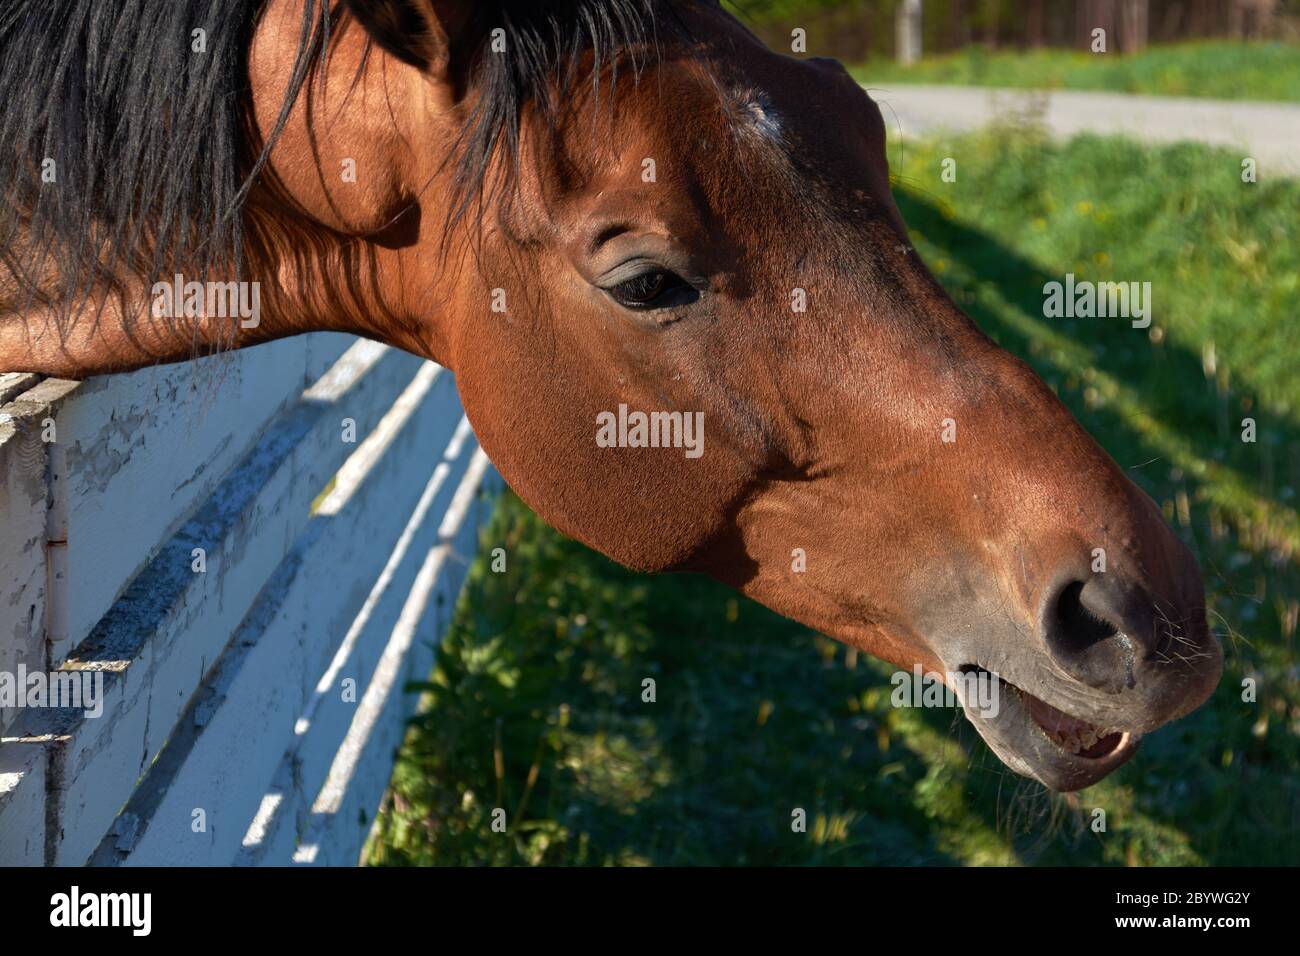 snout of a wild brown horse close-up. Stock Photo